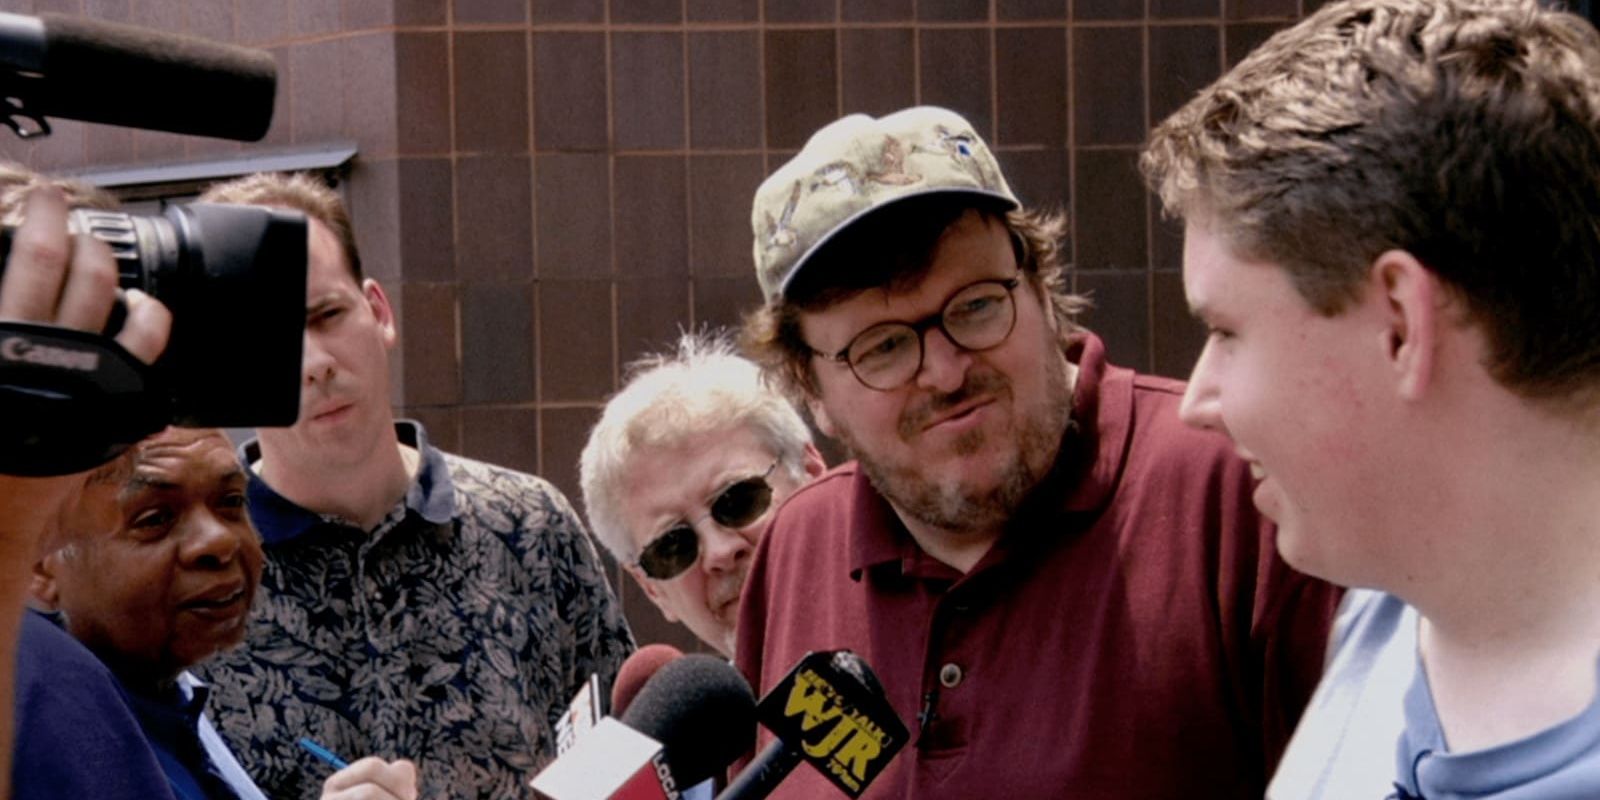 bowling for columbine, Michael Moore, Cameras, Victim, Journalists